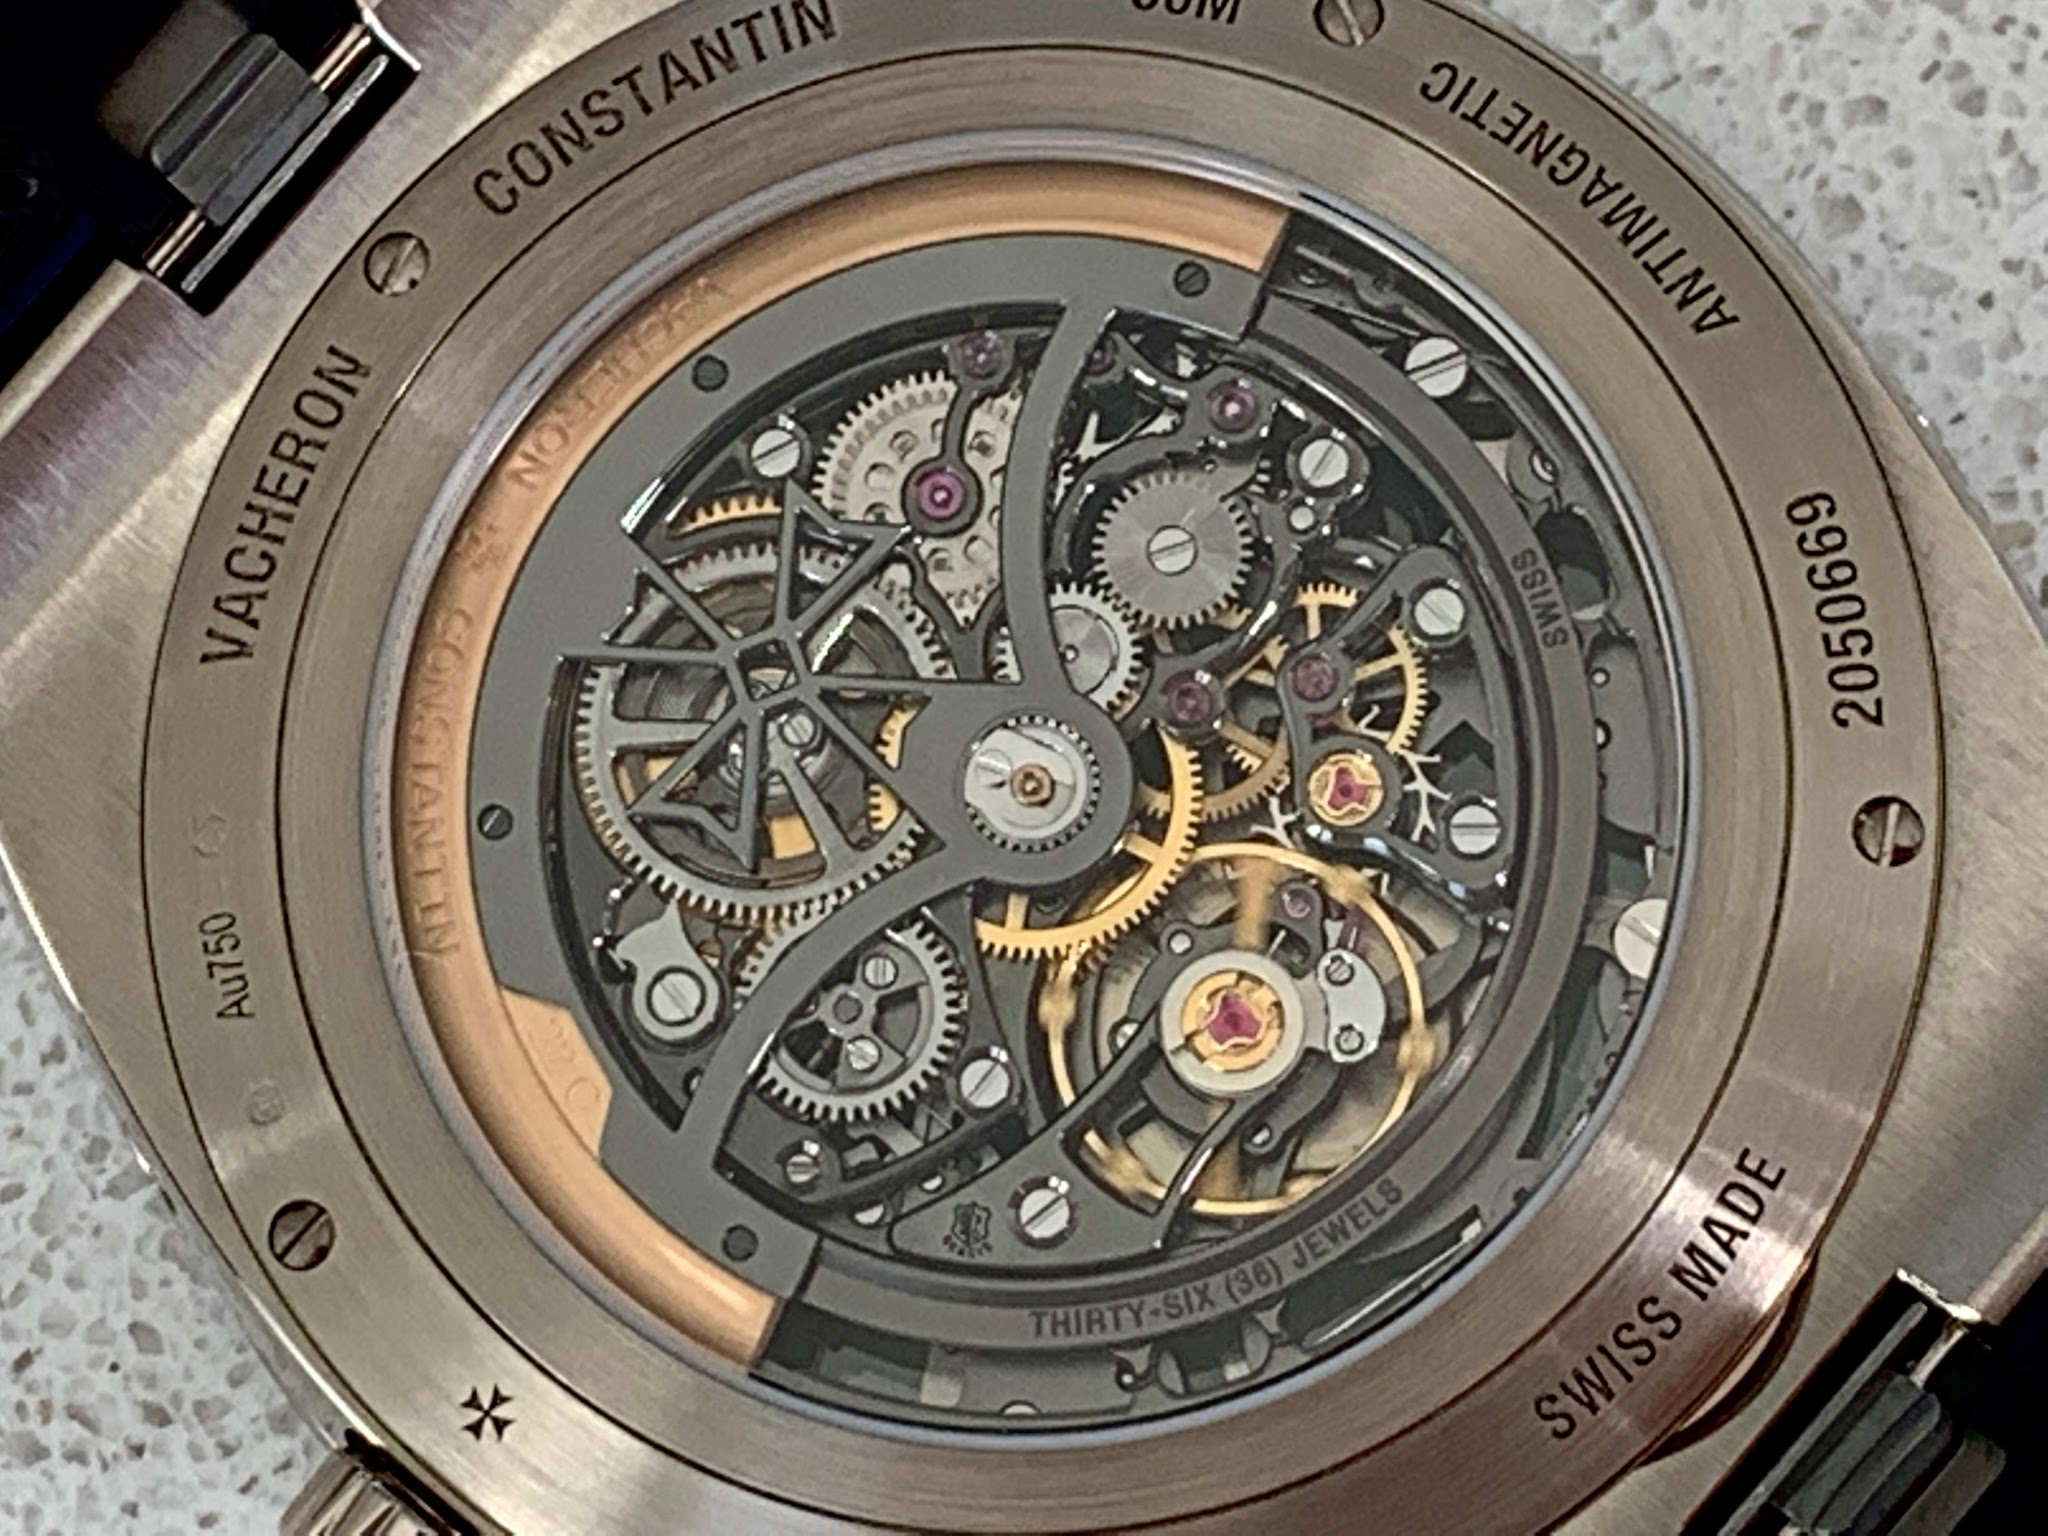 Vacheron Constantin Introduces the Overseas Automatic and